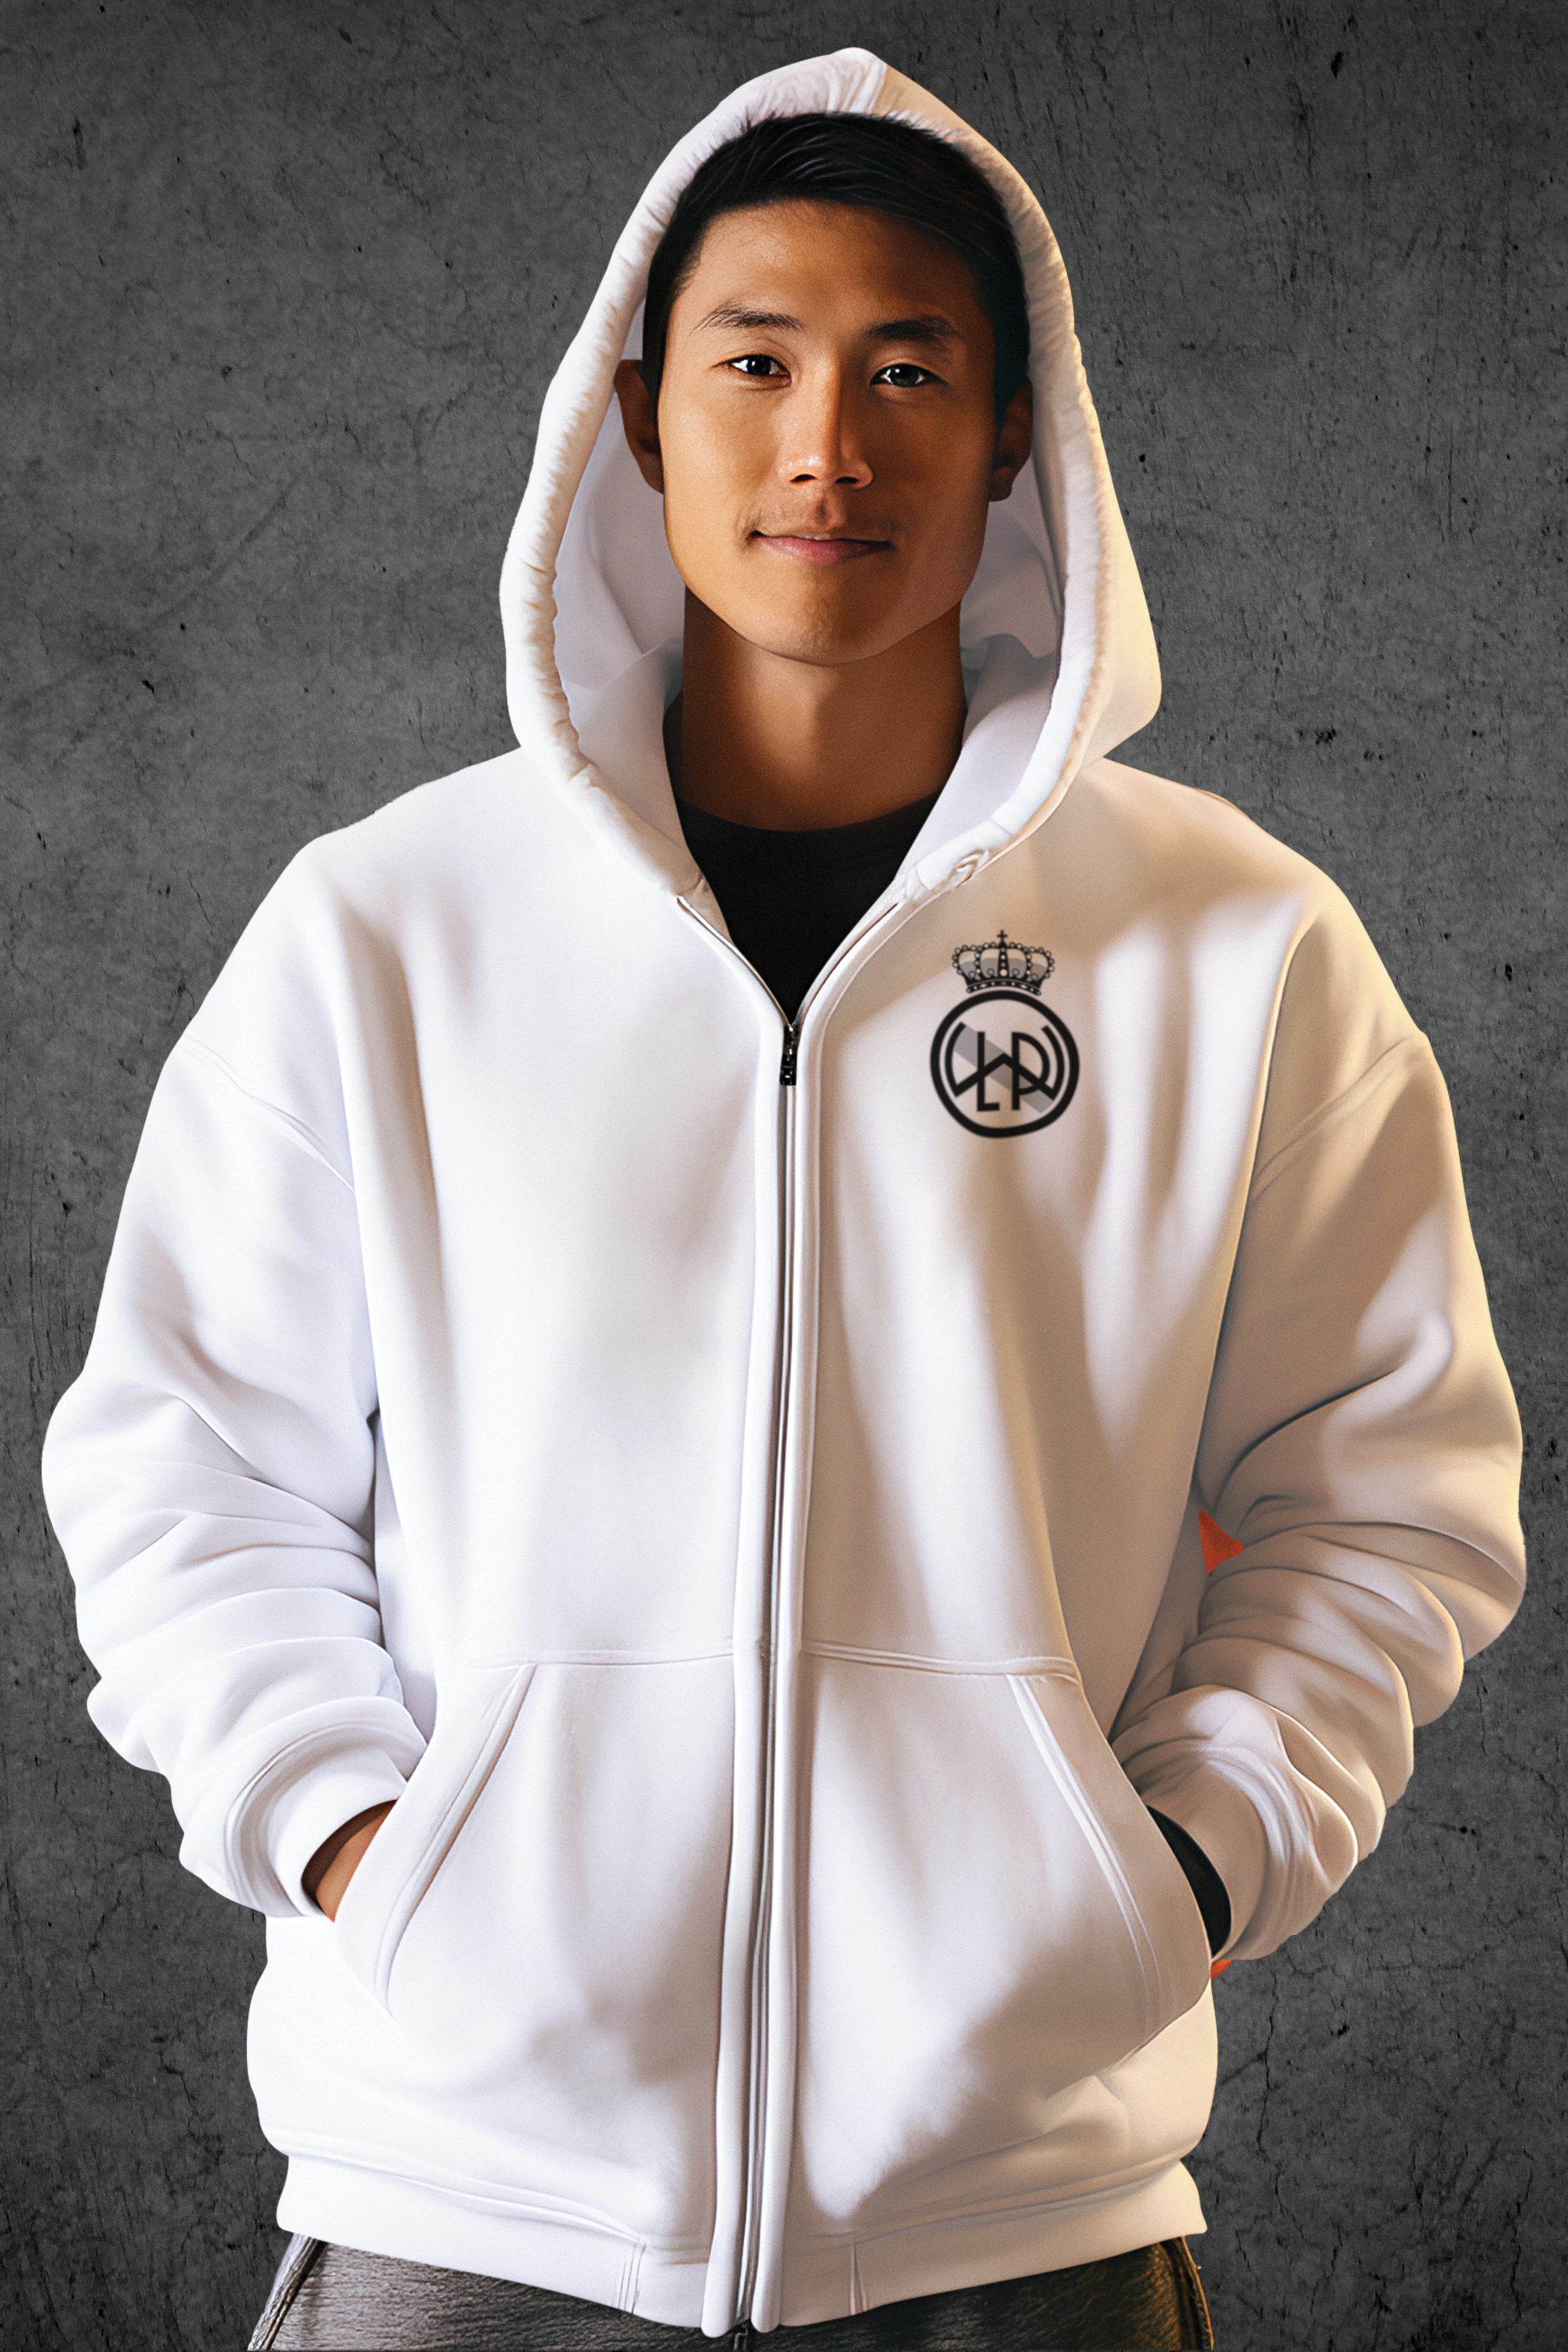 A young asian man wearing a white zip-up hoodie with a Lake Washington Premier FC club creat in black and white on the left breast.